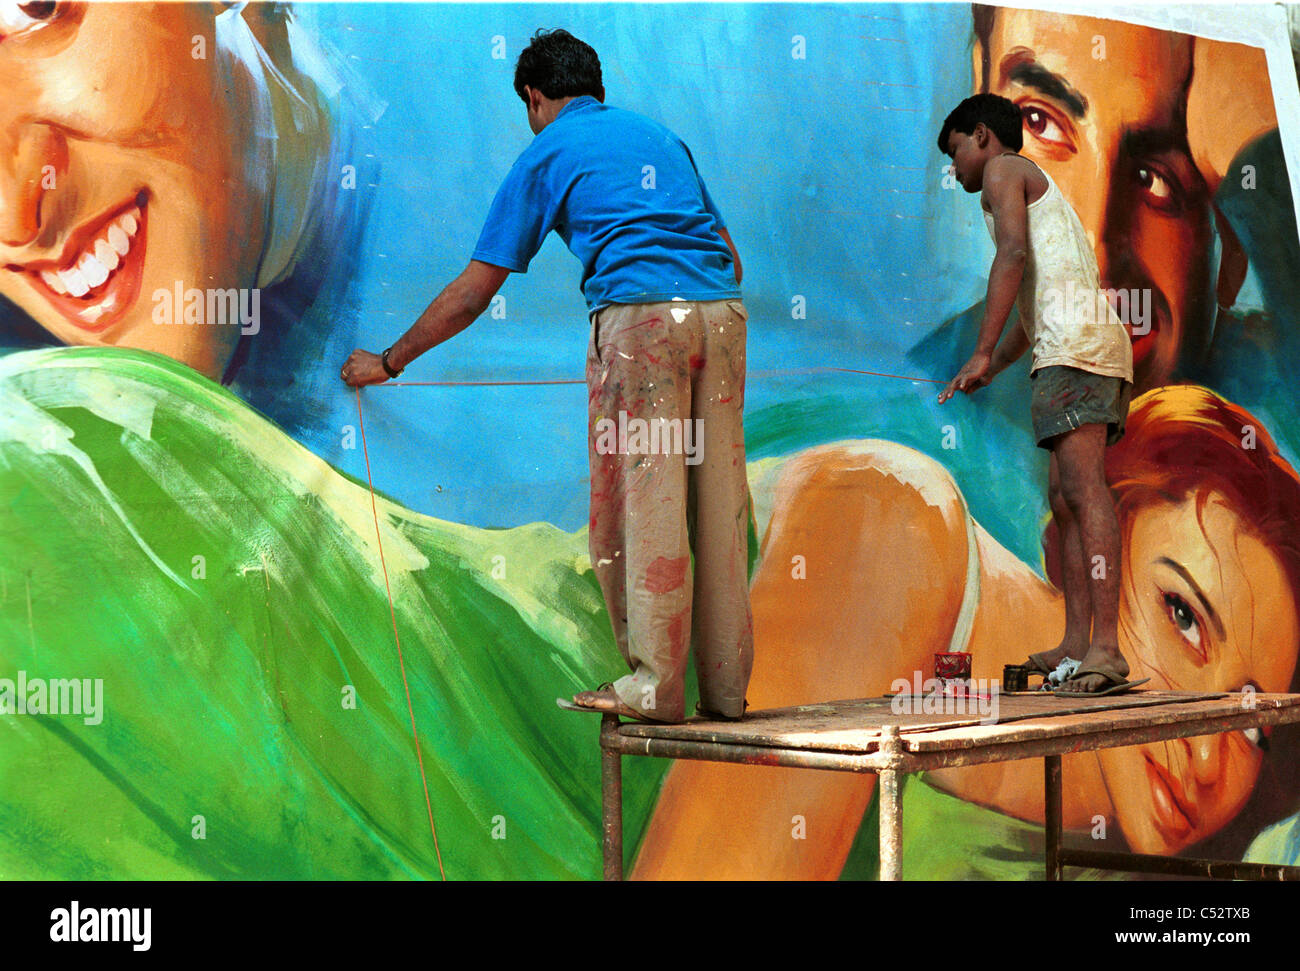 INDIA, Mumbai Bombay, Ellora Arts film hoarder, artists paint large wall posters as advertisement for new Bollywood movie releases at cinemas Stock Photo